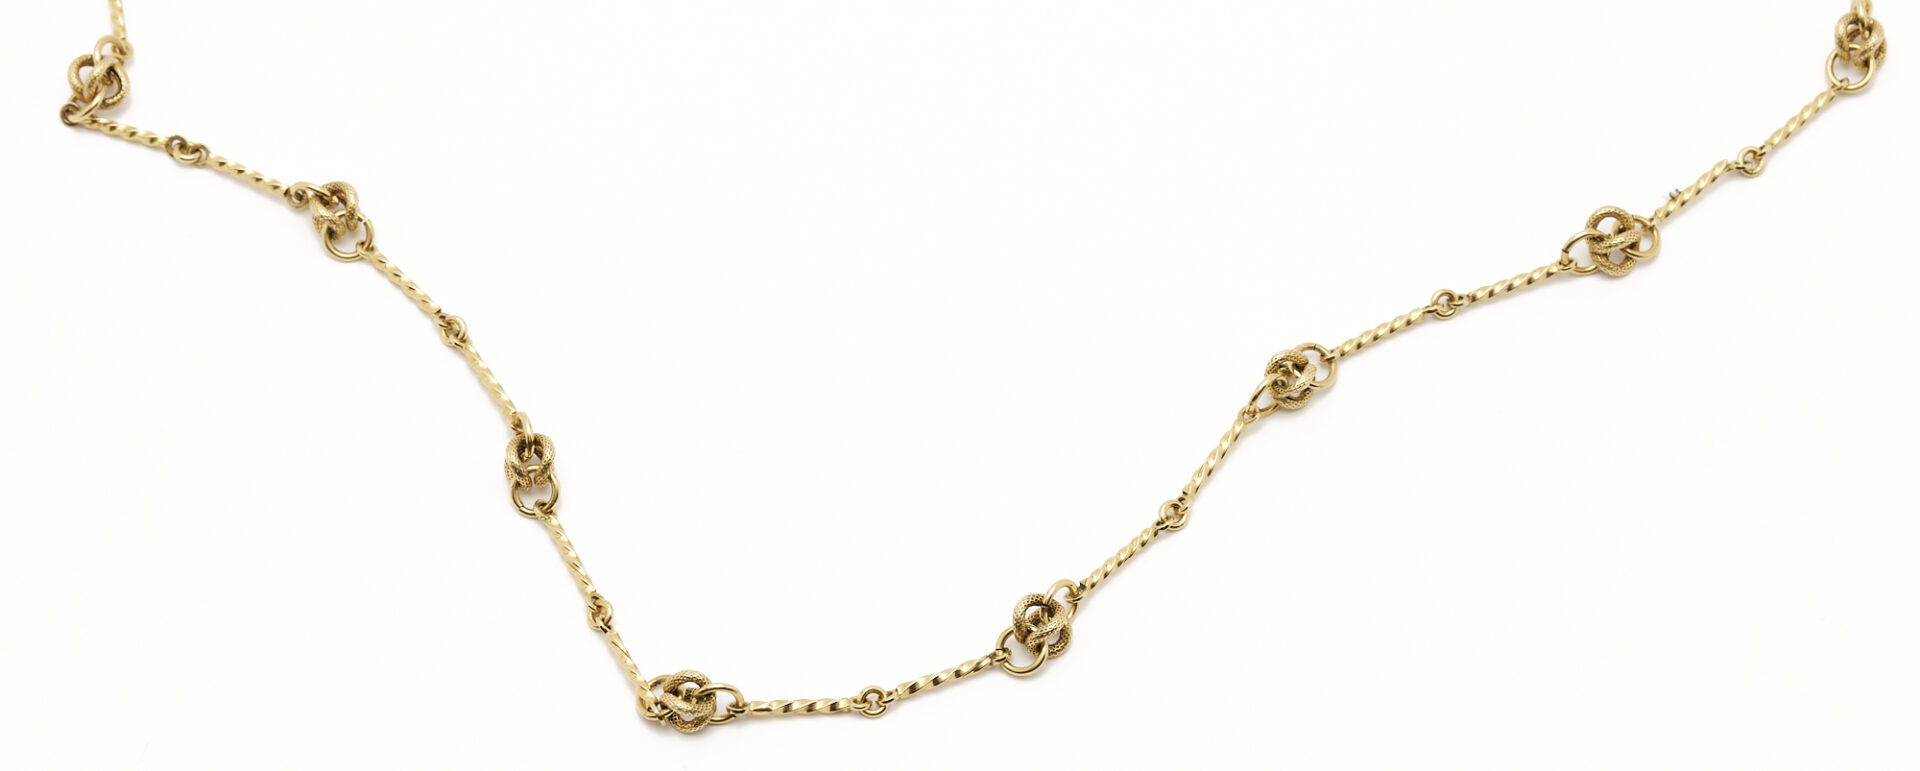 Lot 257: 18K Twisted Bar & Knot Chain Necklace